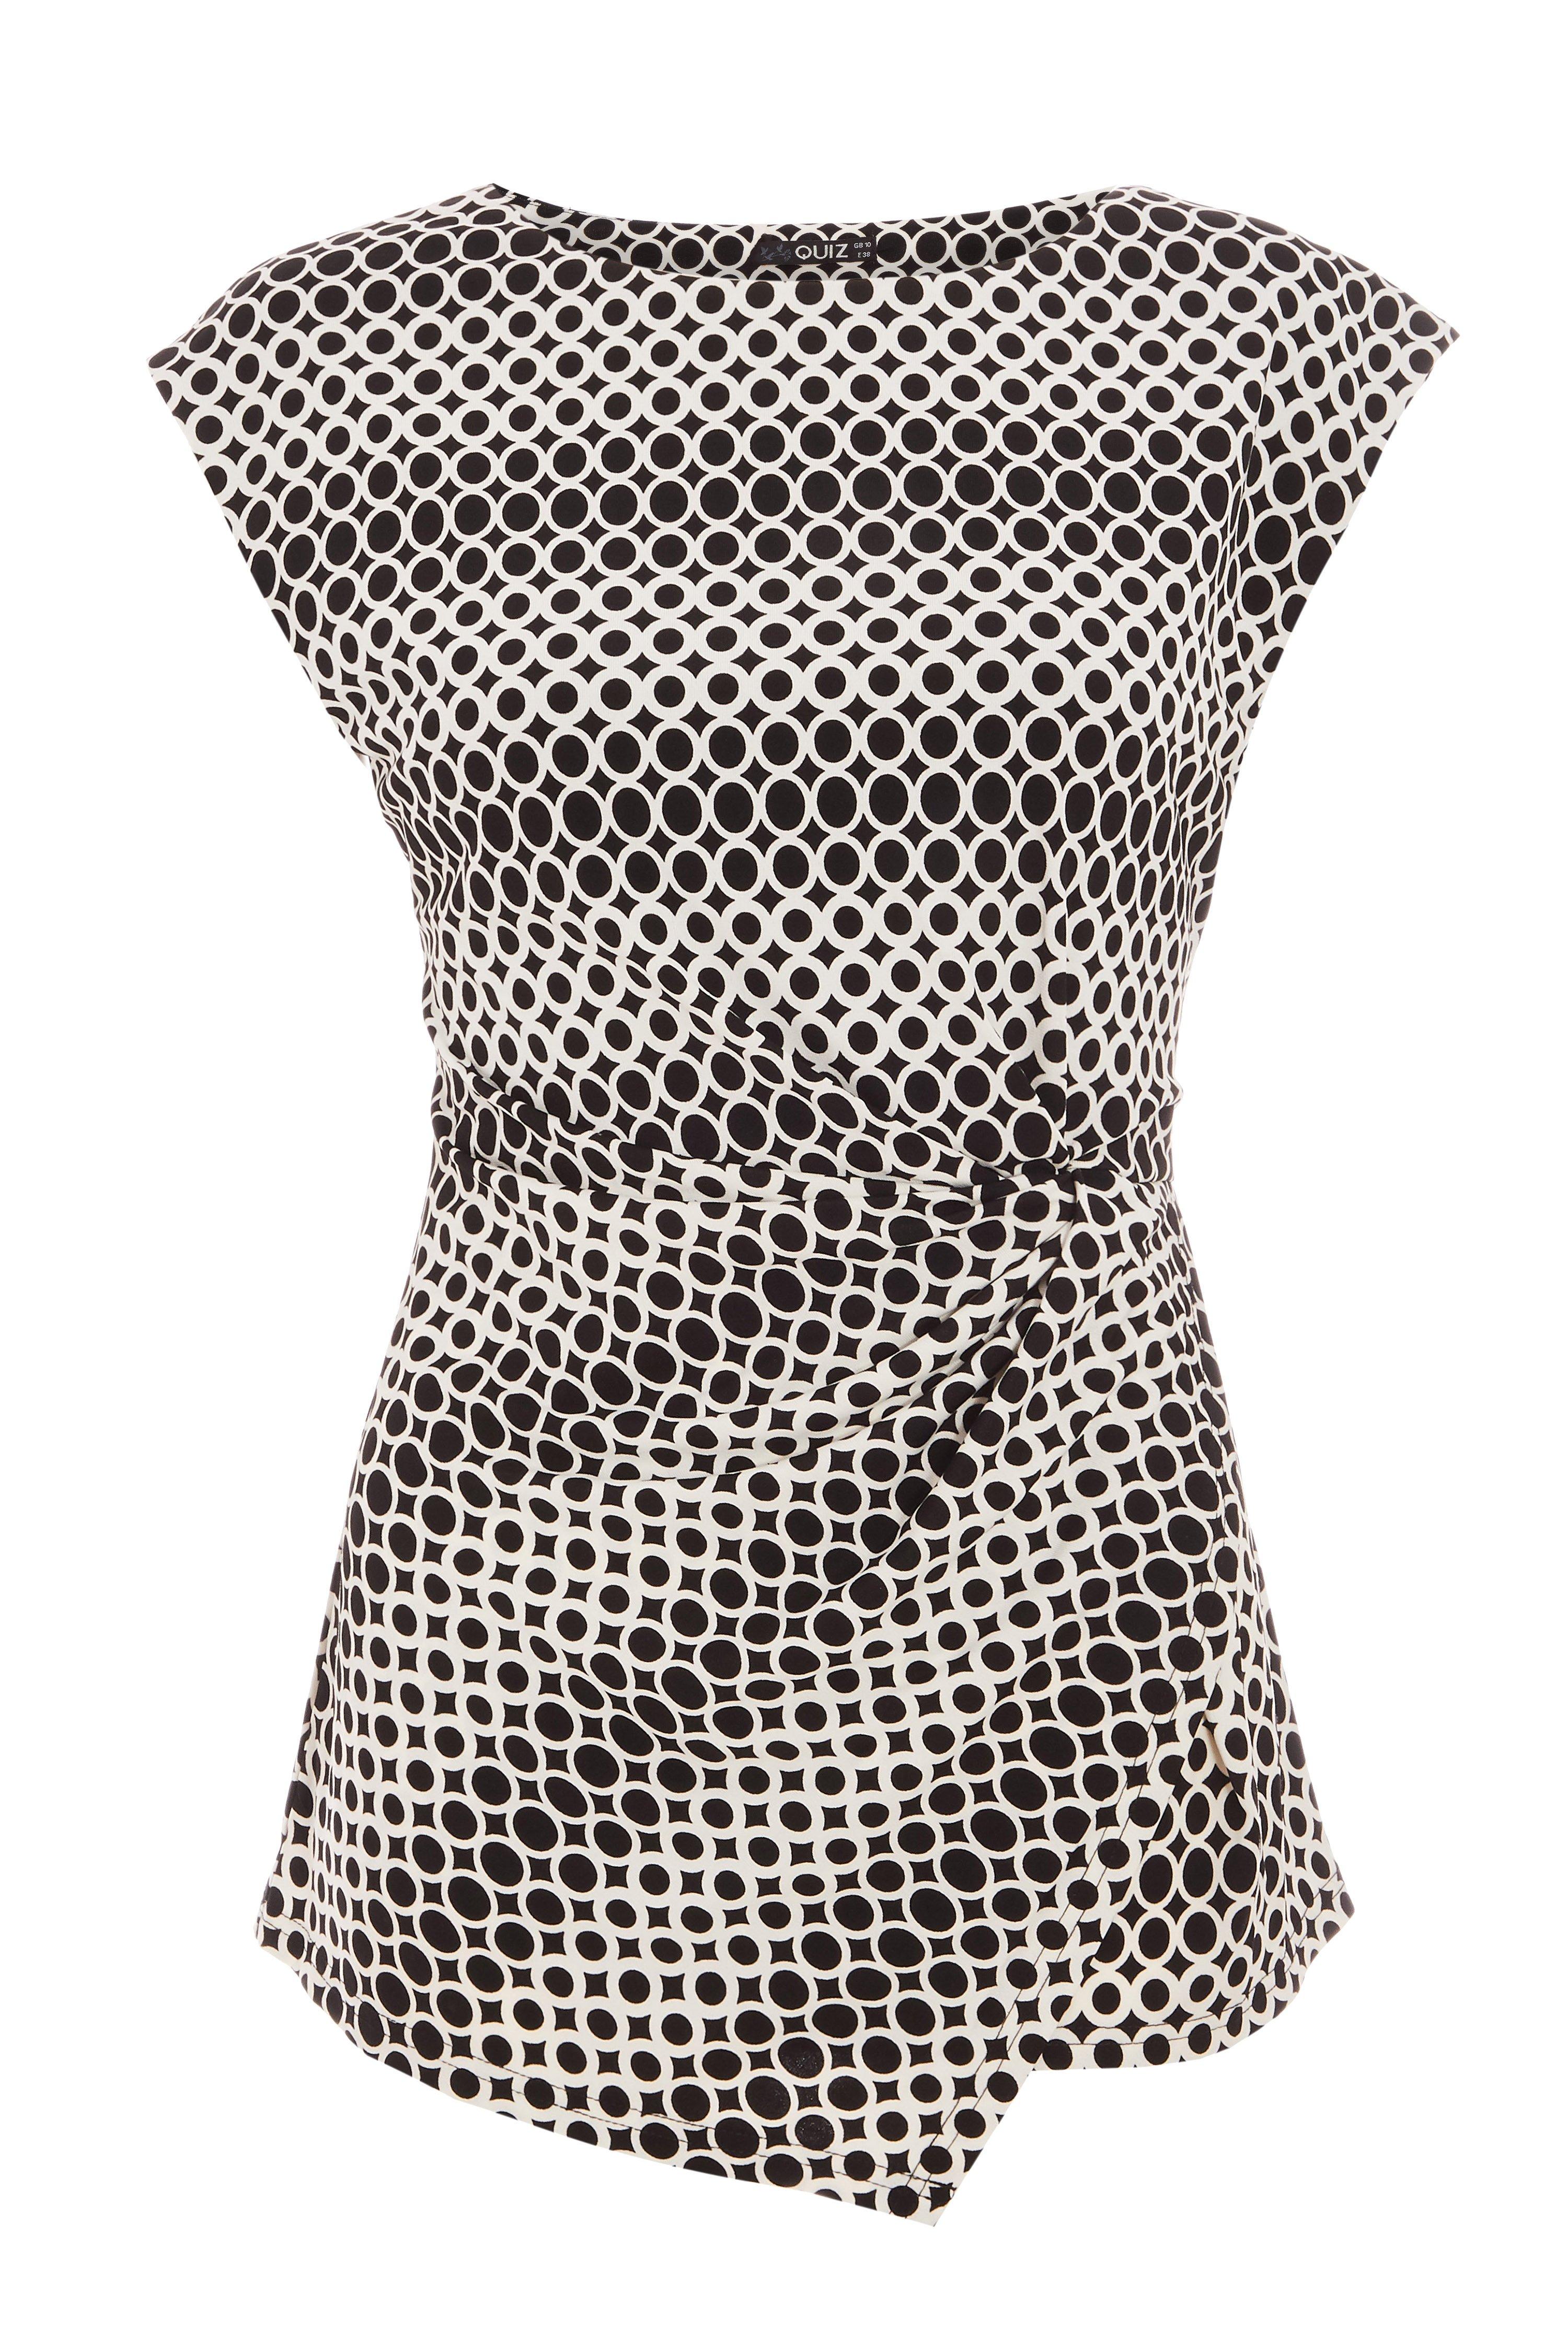 Black and White Geometric Print Knot Front Top - Quiz Clothing